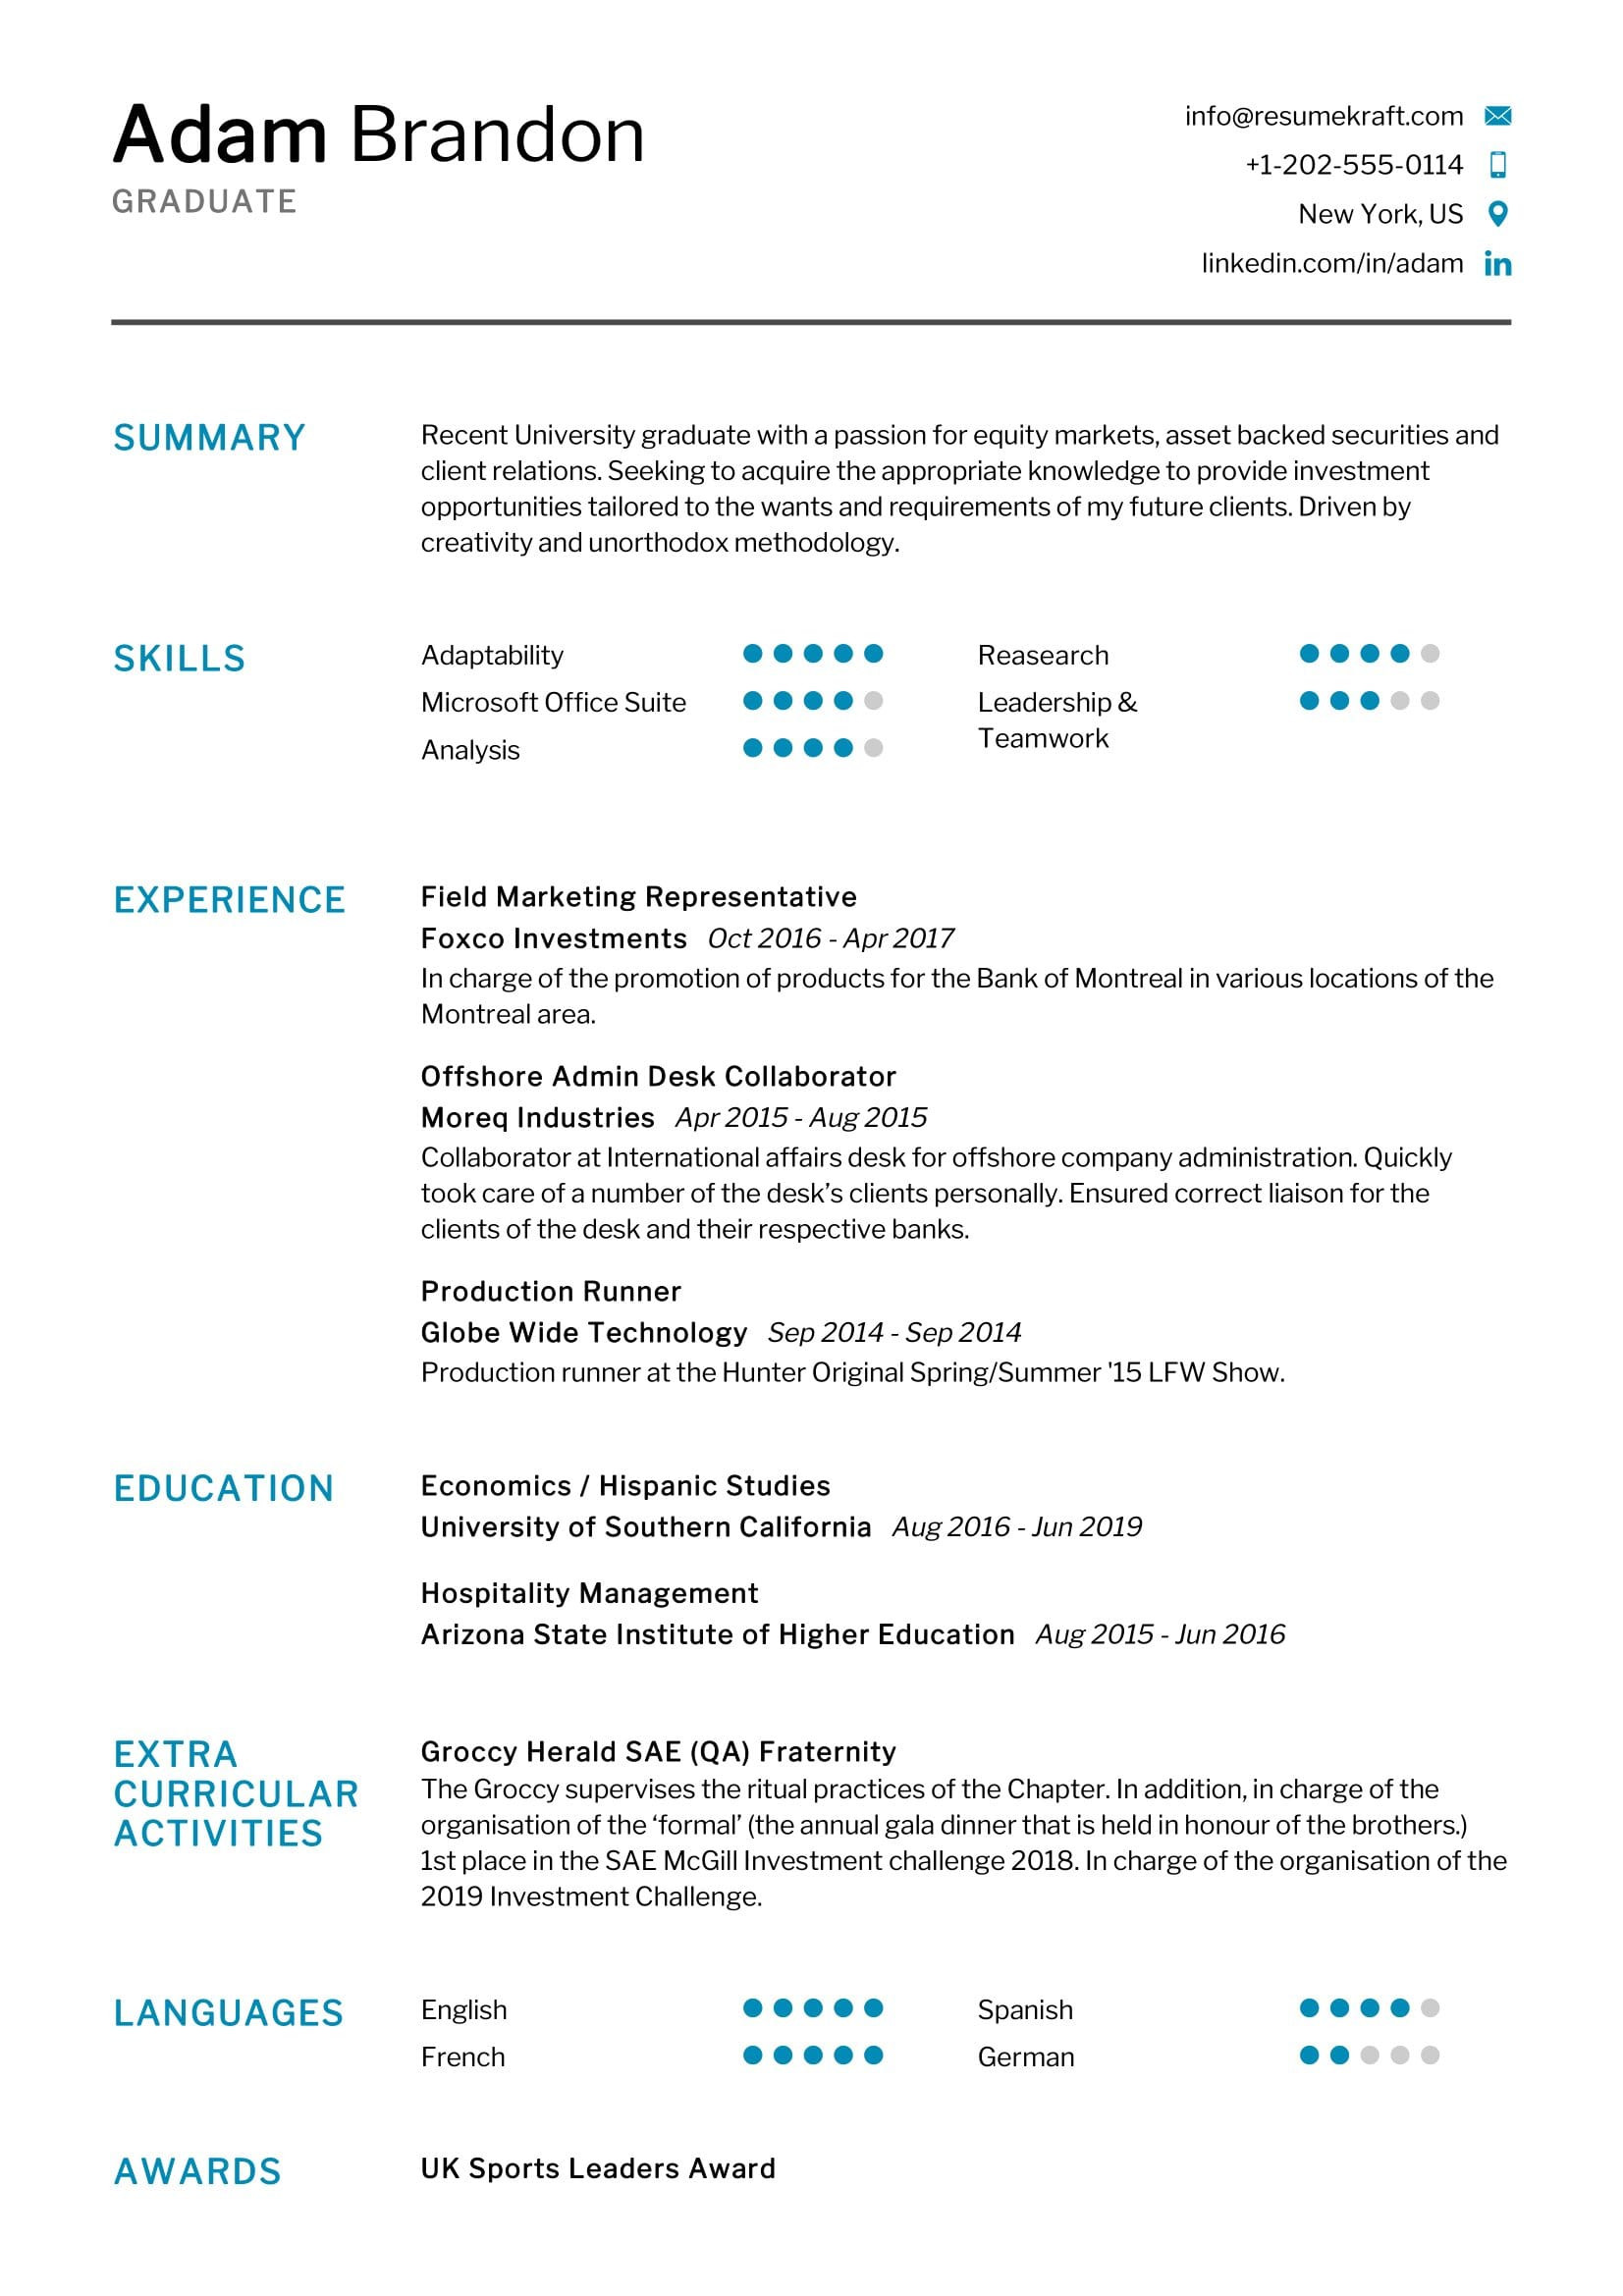 Sample Resume for Fresh Graduates with No Experience Fresh Graduate Resume Sample 2021 Writing Tips – Resumekraft